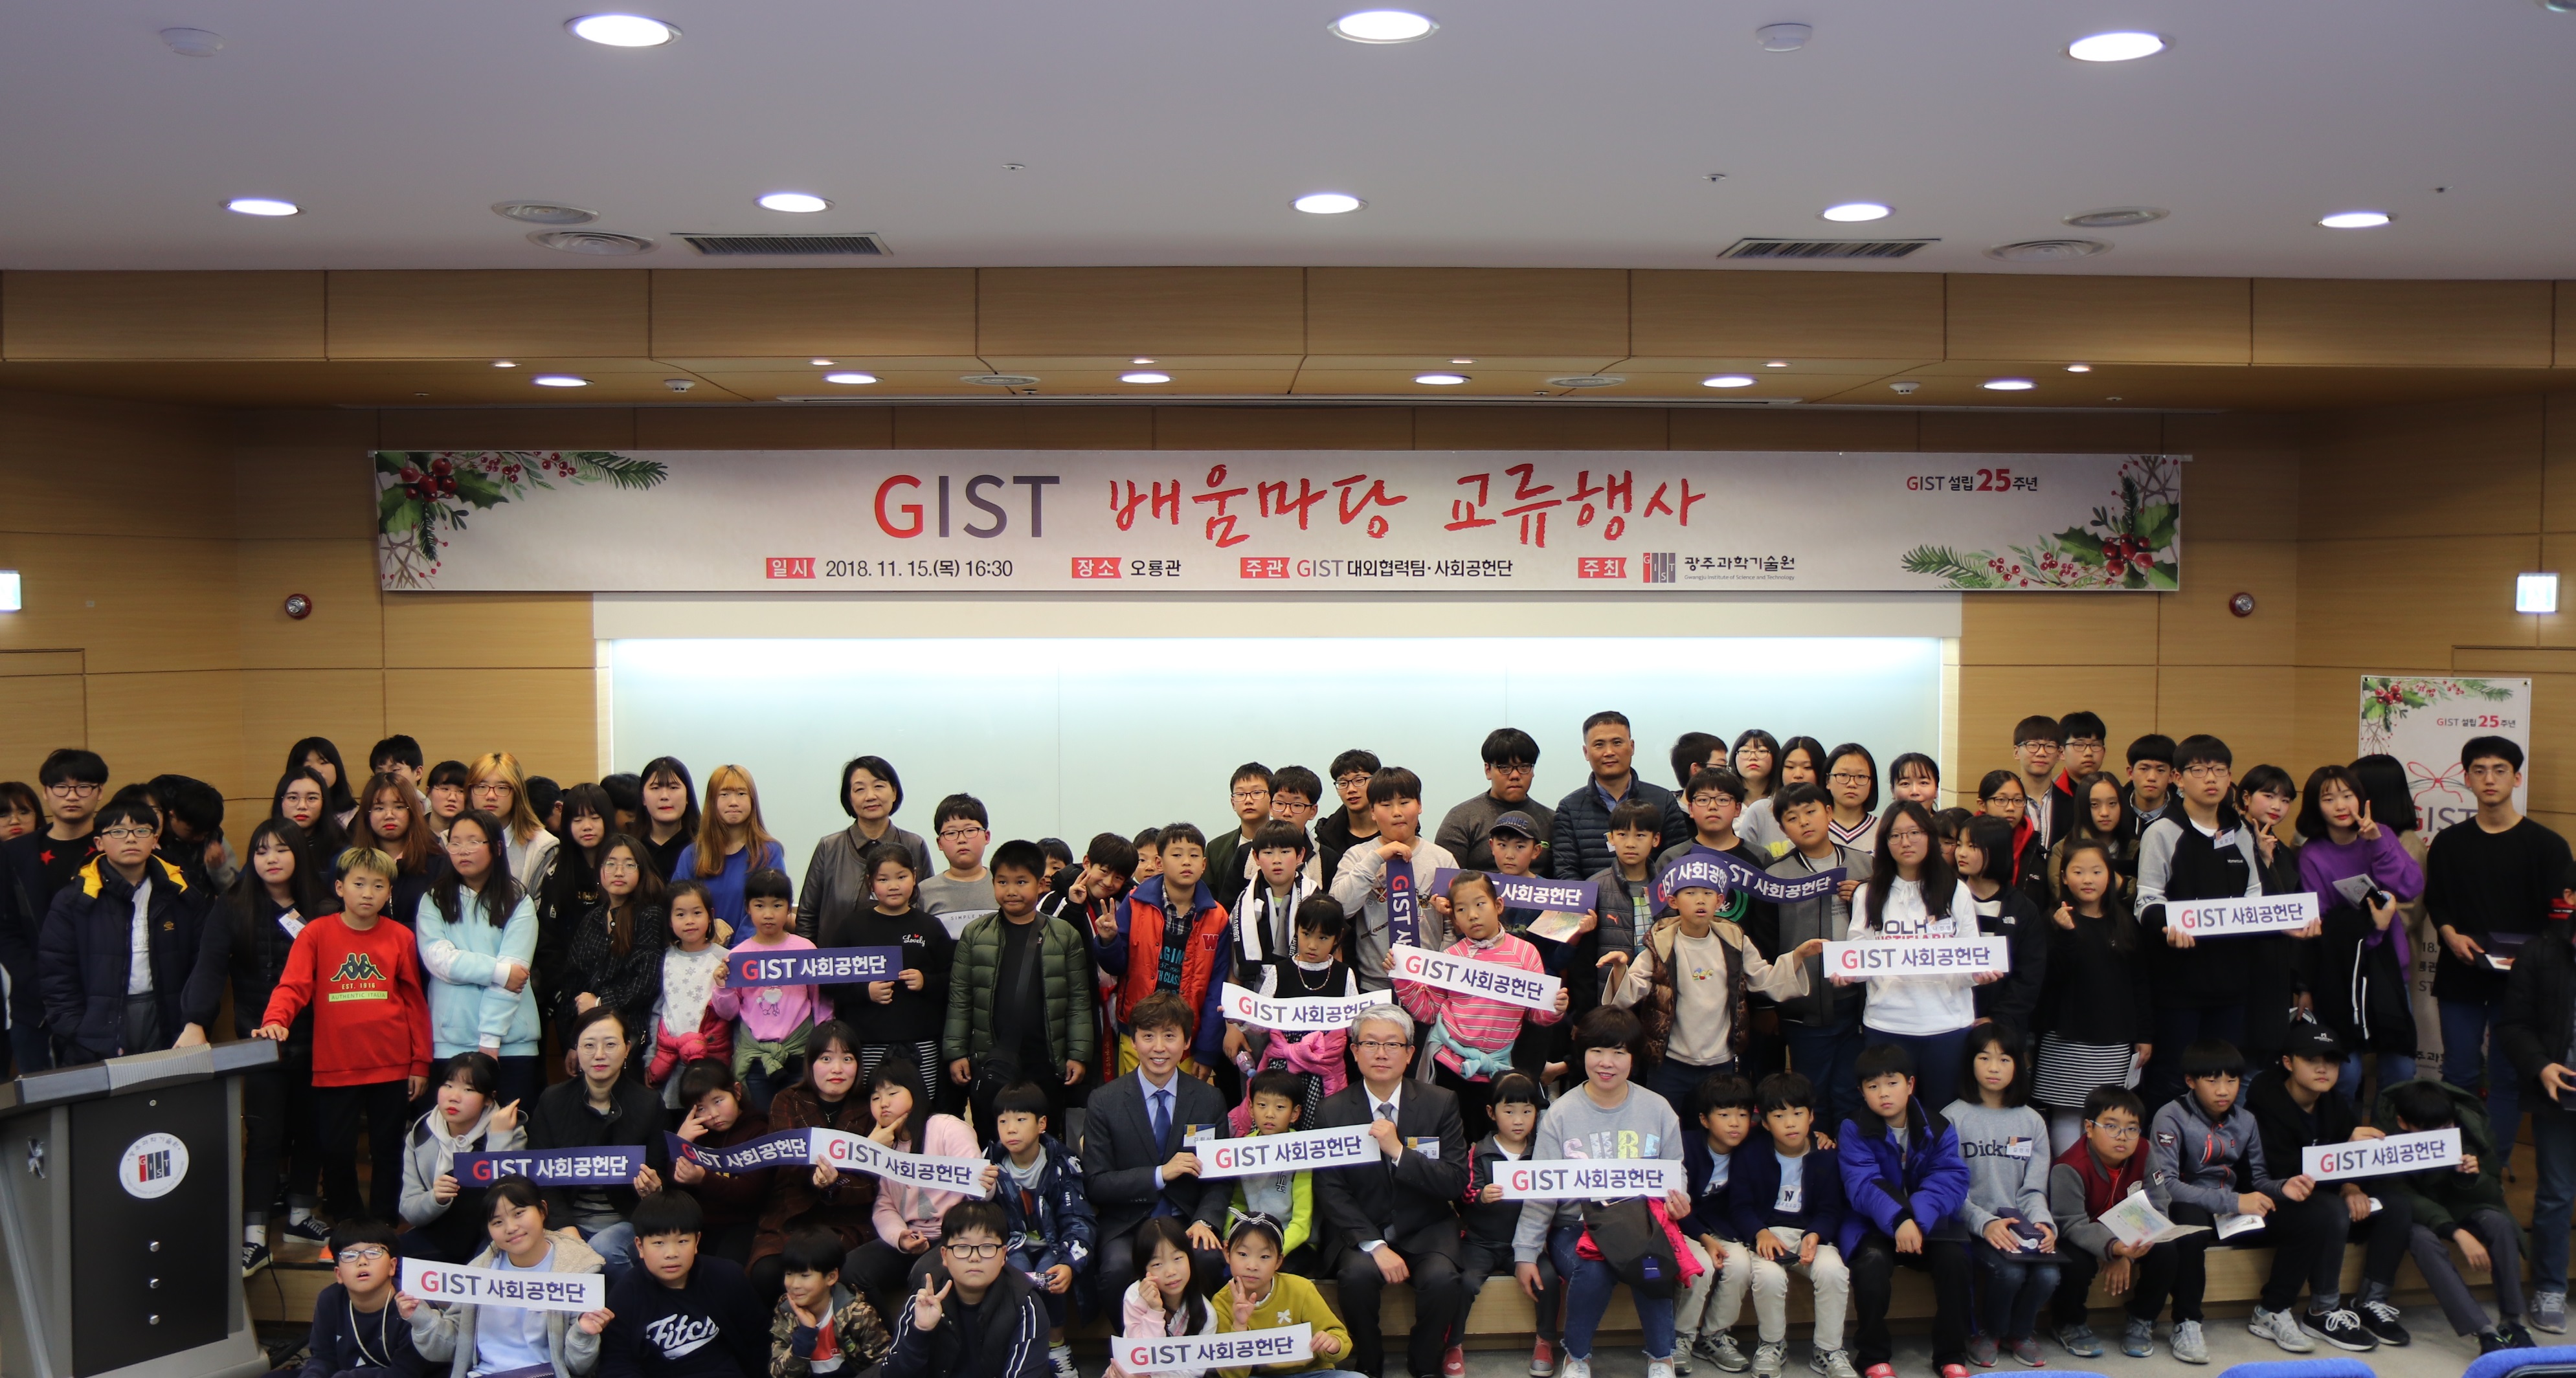 [25th Anniversary Celebration] 2018 GIST Learning Zone exchange event 이미지